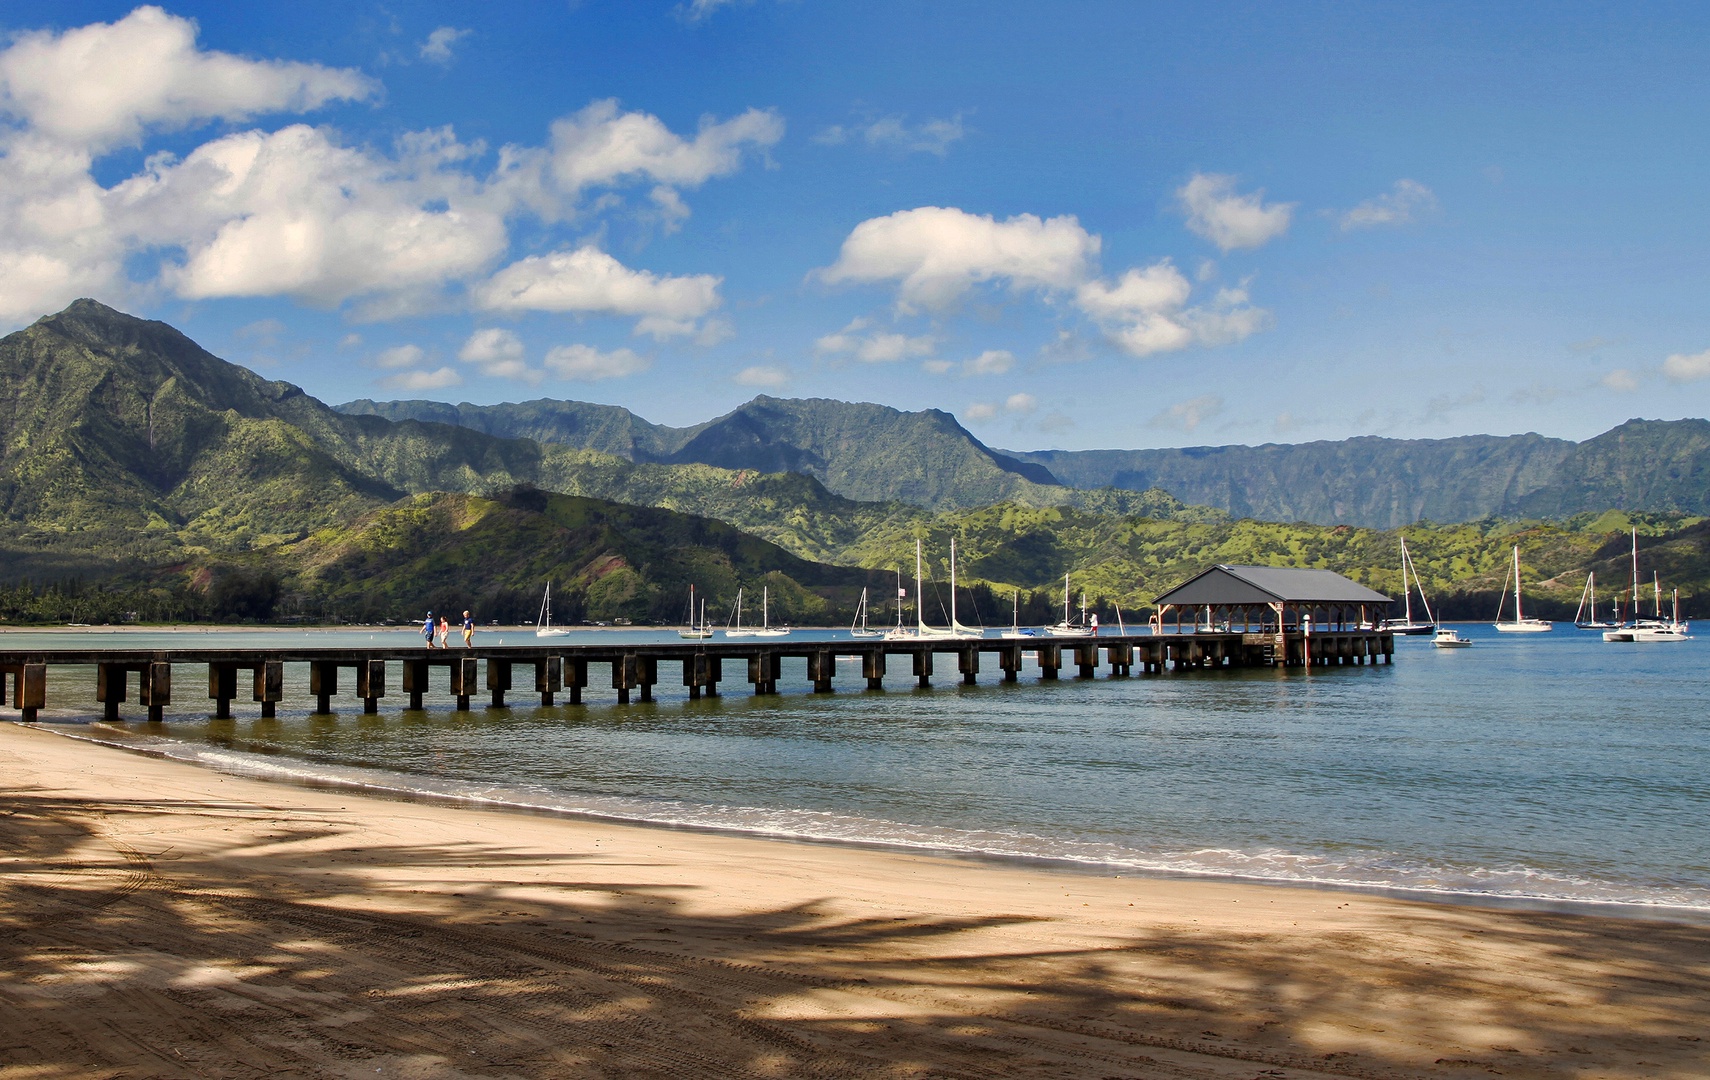 Koloa Vacation Rentals, Pili Mai 7J - Stroll along the pier with stunning mountain views for a perfect afternoon escape.